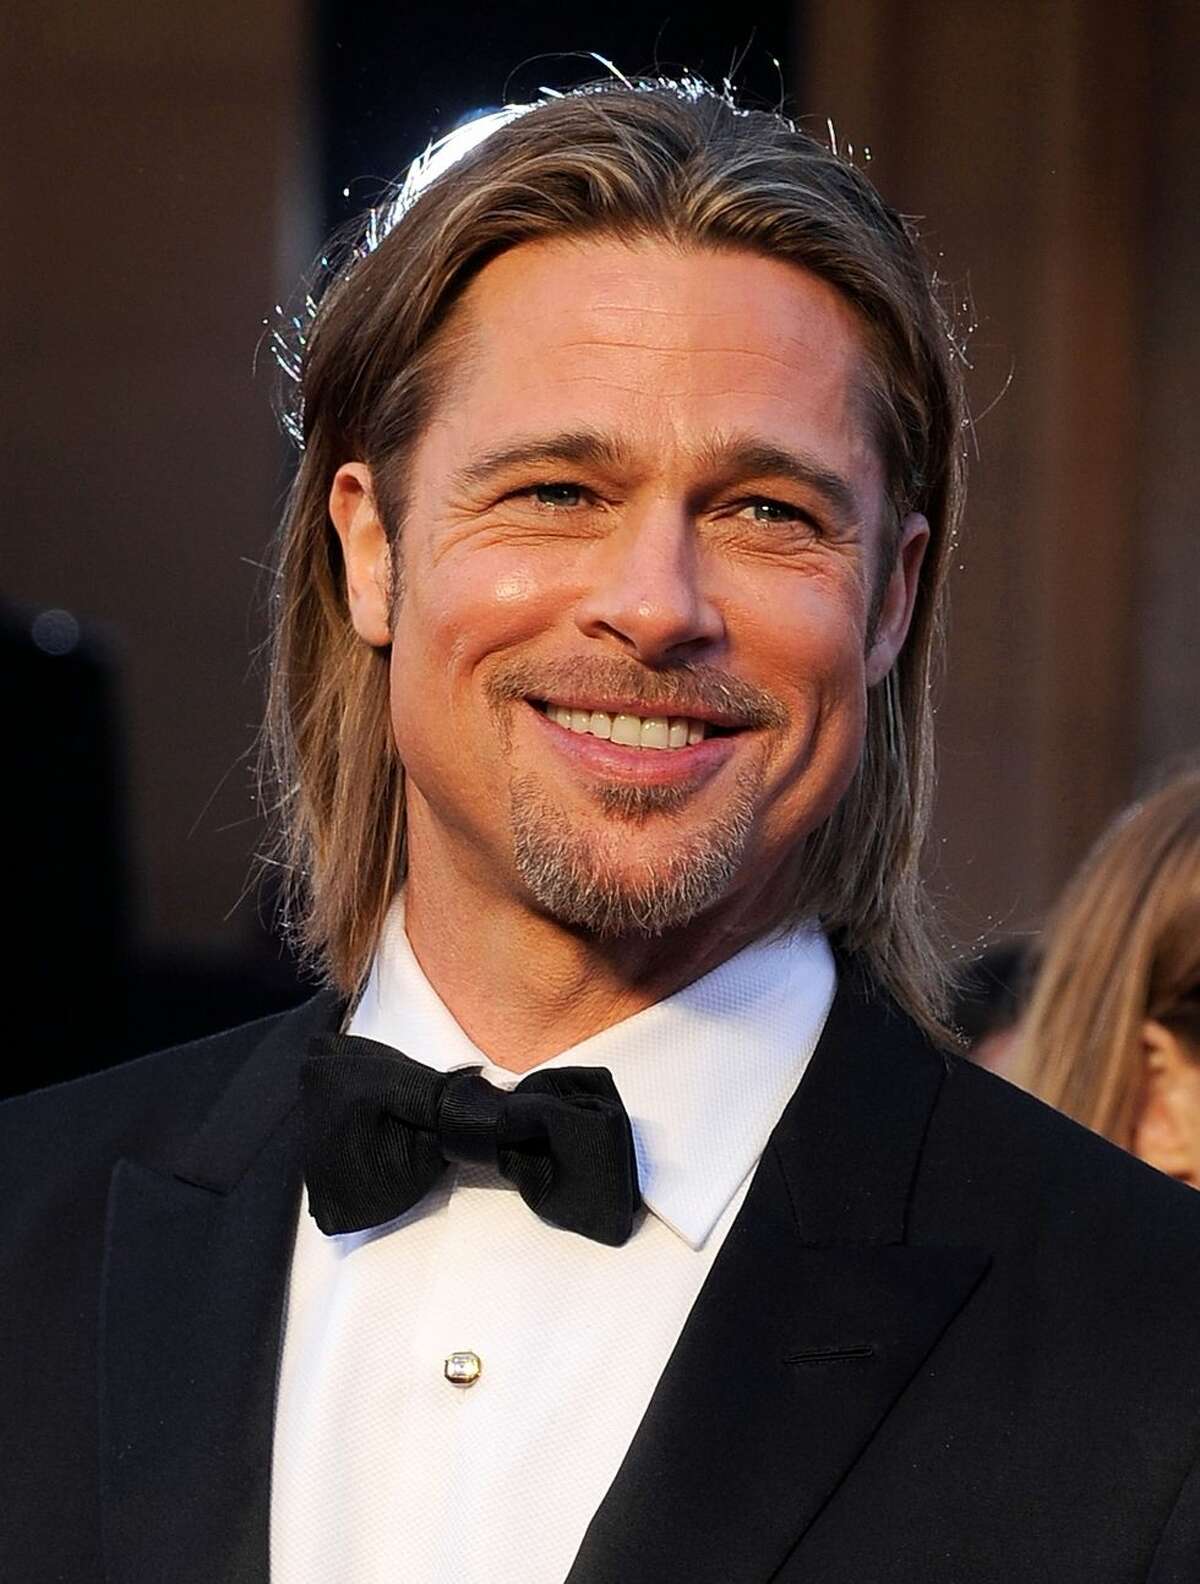 Brad Pitt spent $40,000 for "an exclusive experience with the San Antonio Spurs" at the 2018 annual auction benefit for the J/P Haitian Relief Organization in Los Angeles before the Golden Globes.